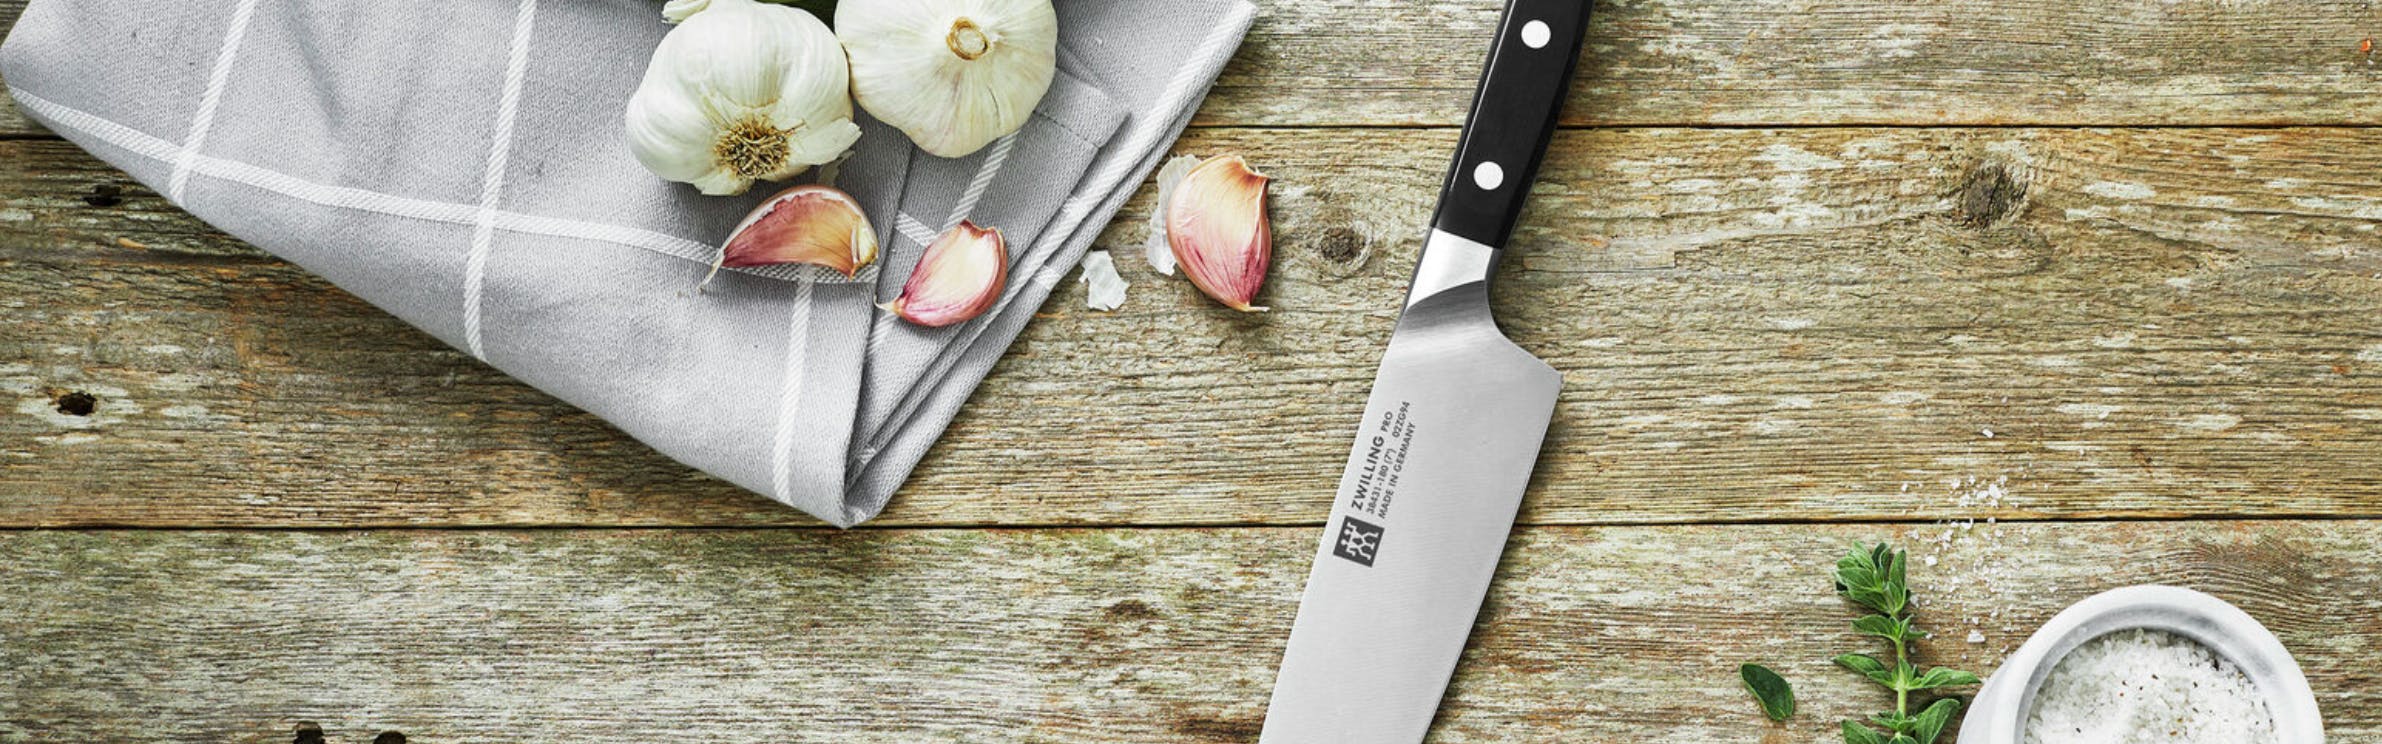 A Zwilling knife laying on a table next to some garlic and salt. 